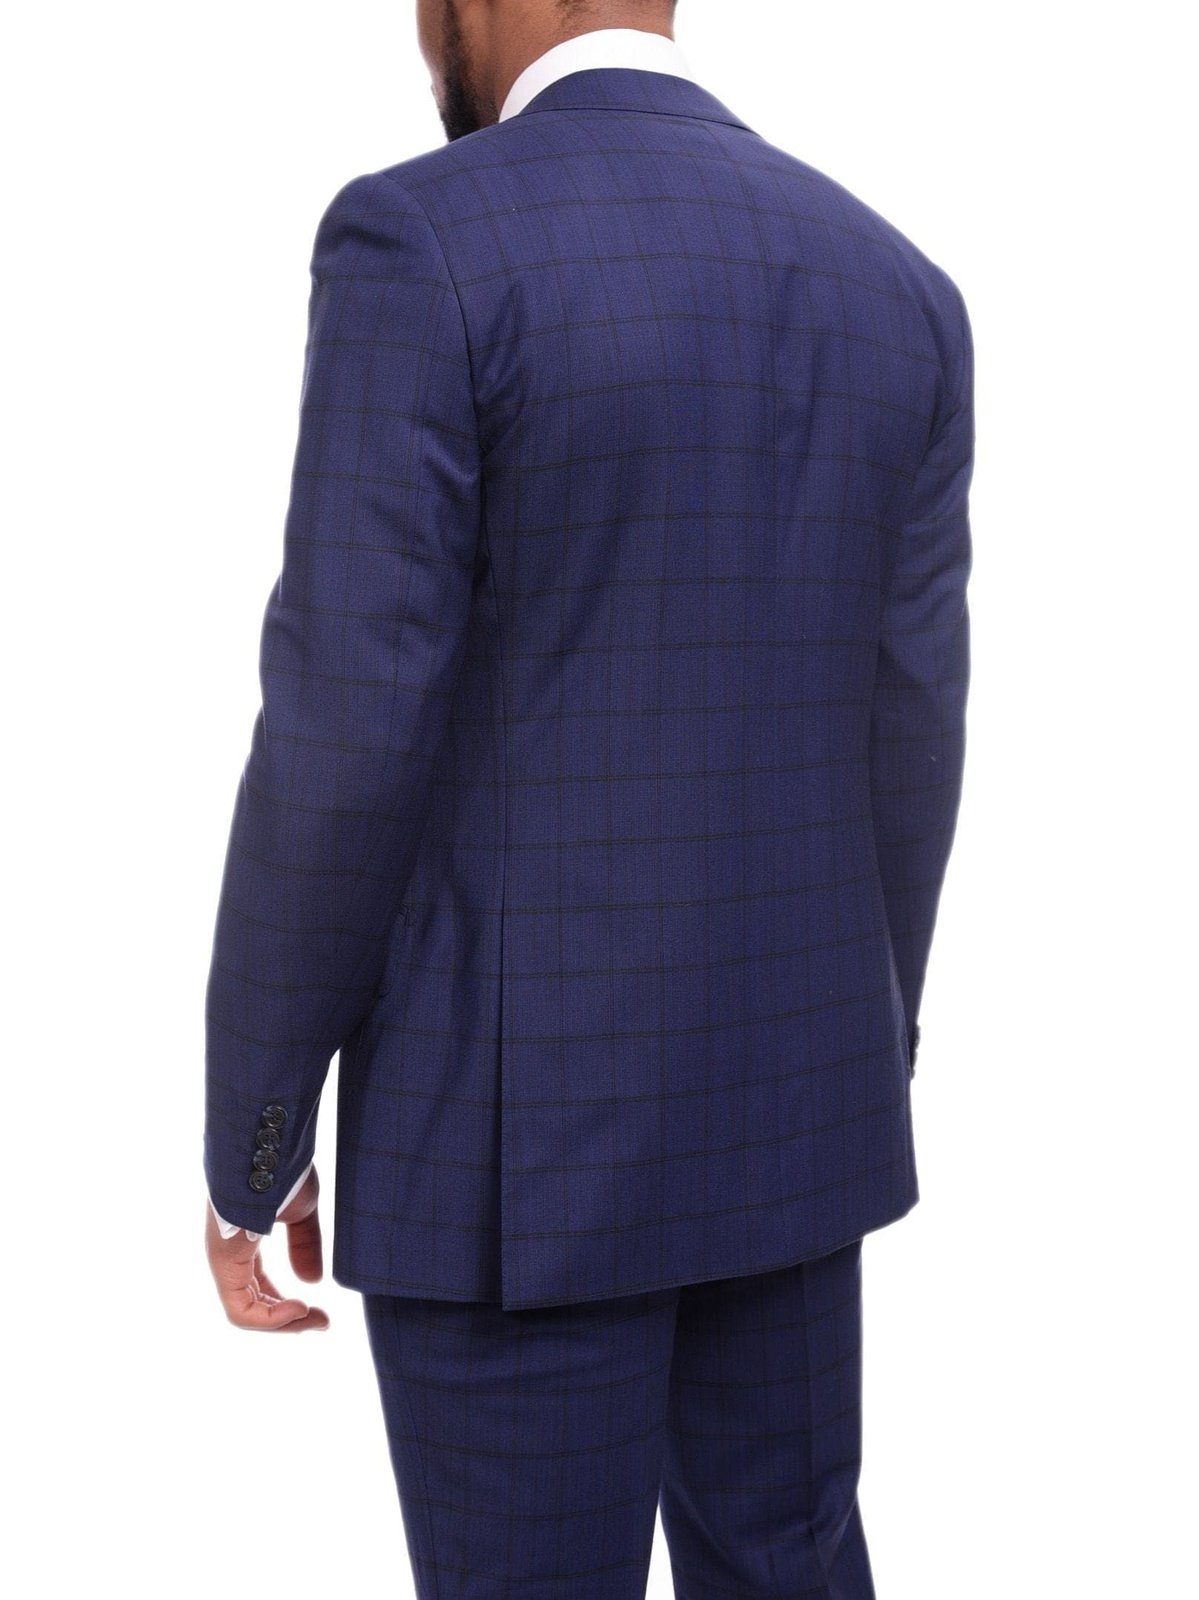 Napoli TWO PIECE SUITS Napoli Slim Fit Blue Plaid Windowpane Two Button Half Canvassed 100% Wool Suit